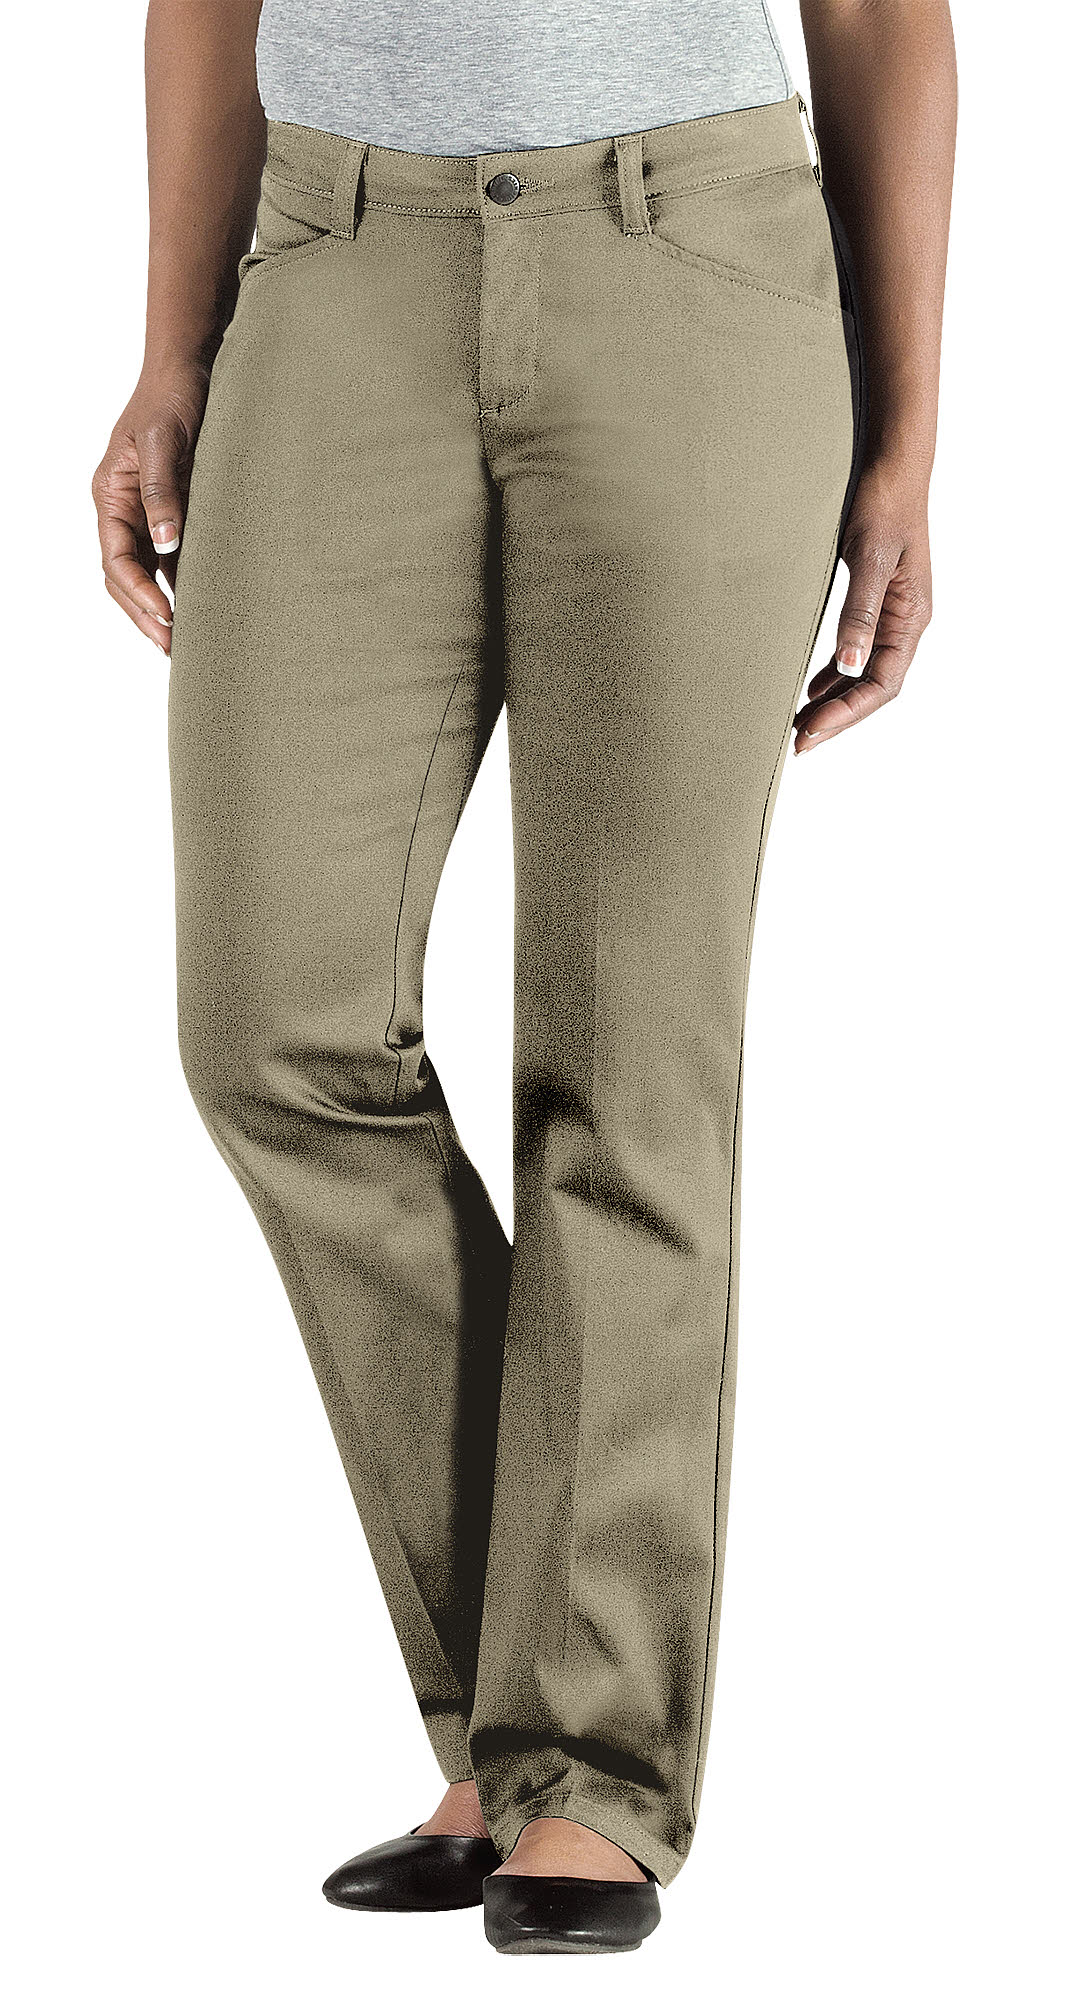 Women's Relaxed Fit Straight Leg Stretch Twill Pants